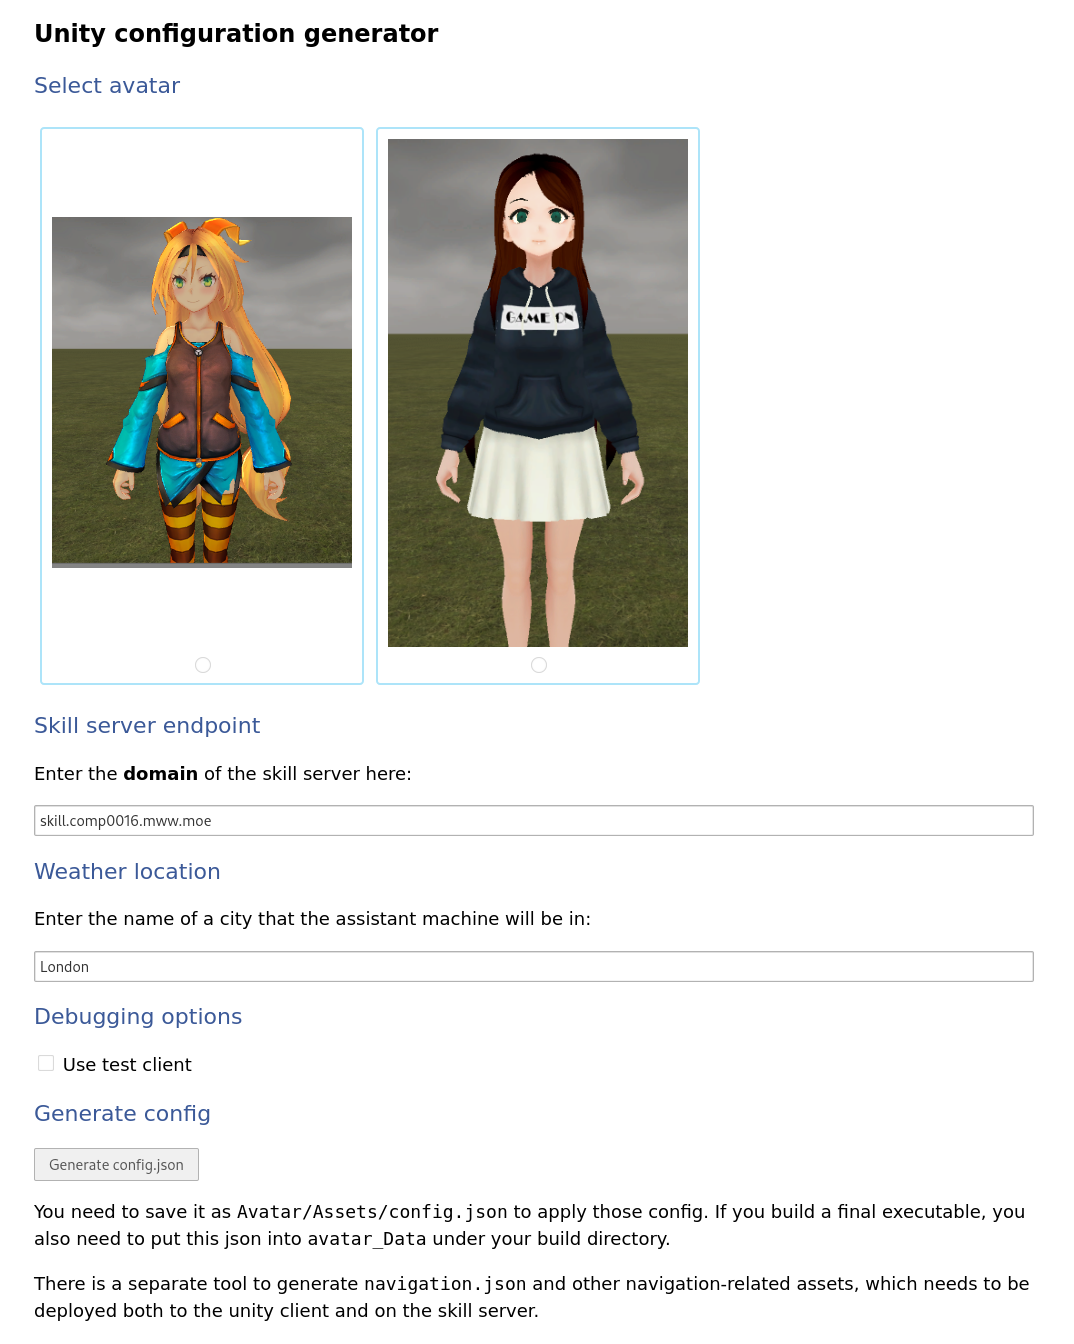 A screenshot of the ConfigGen page